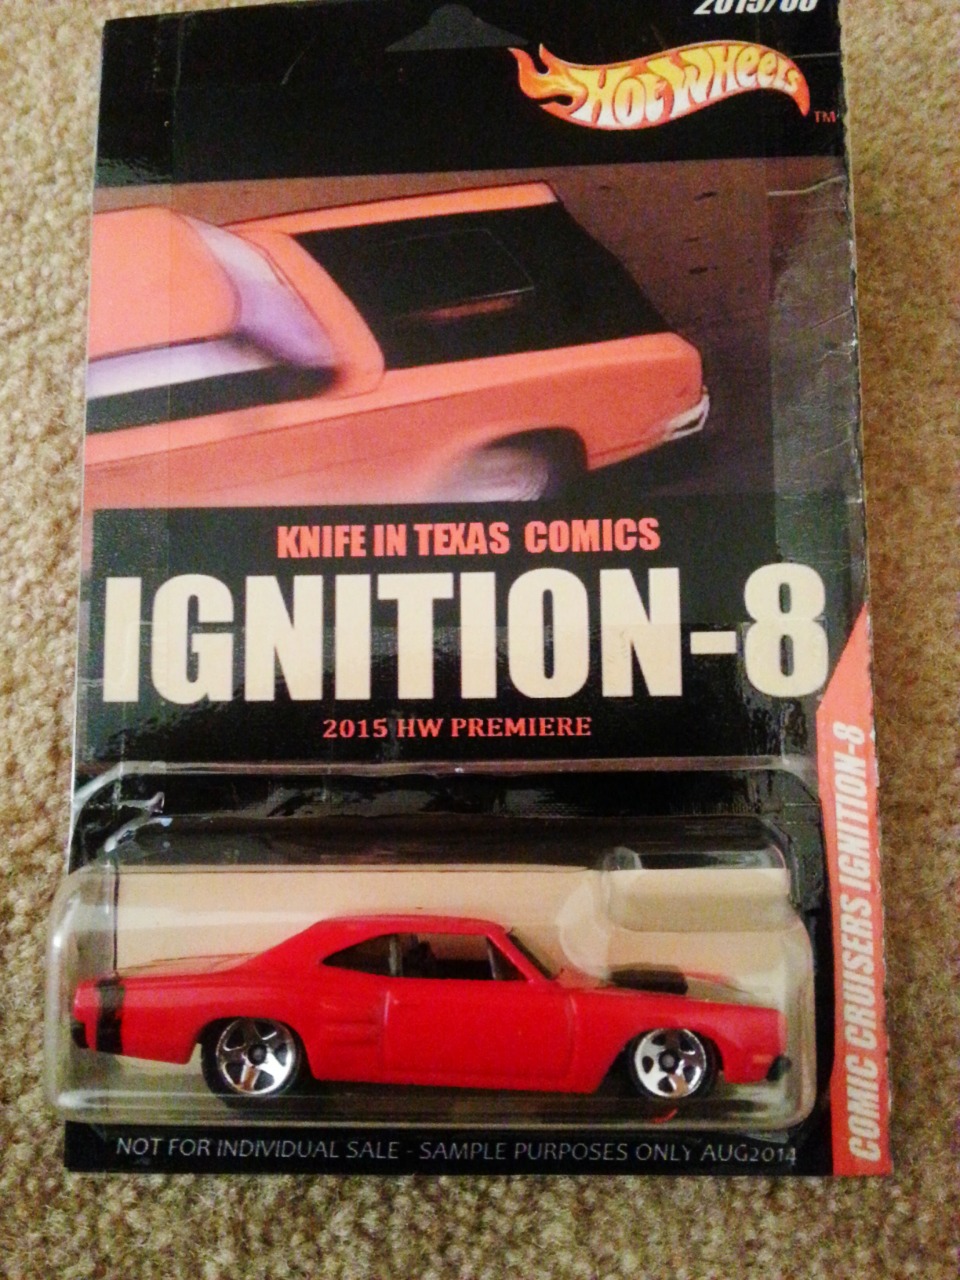 HOT WHEELS IGNITION-8 2015 Prototype diecast release for forthcoming comic in SEP14